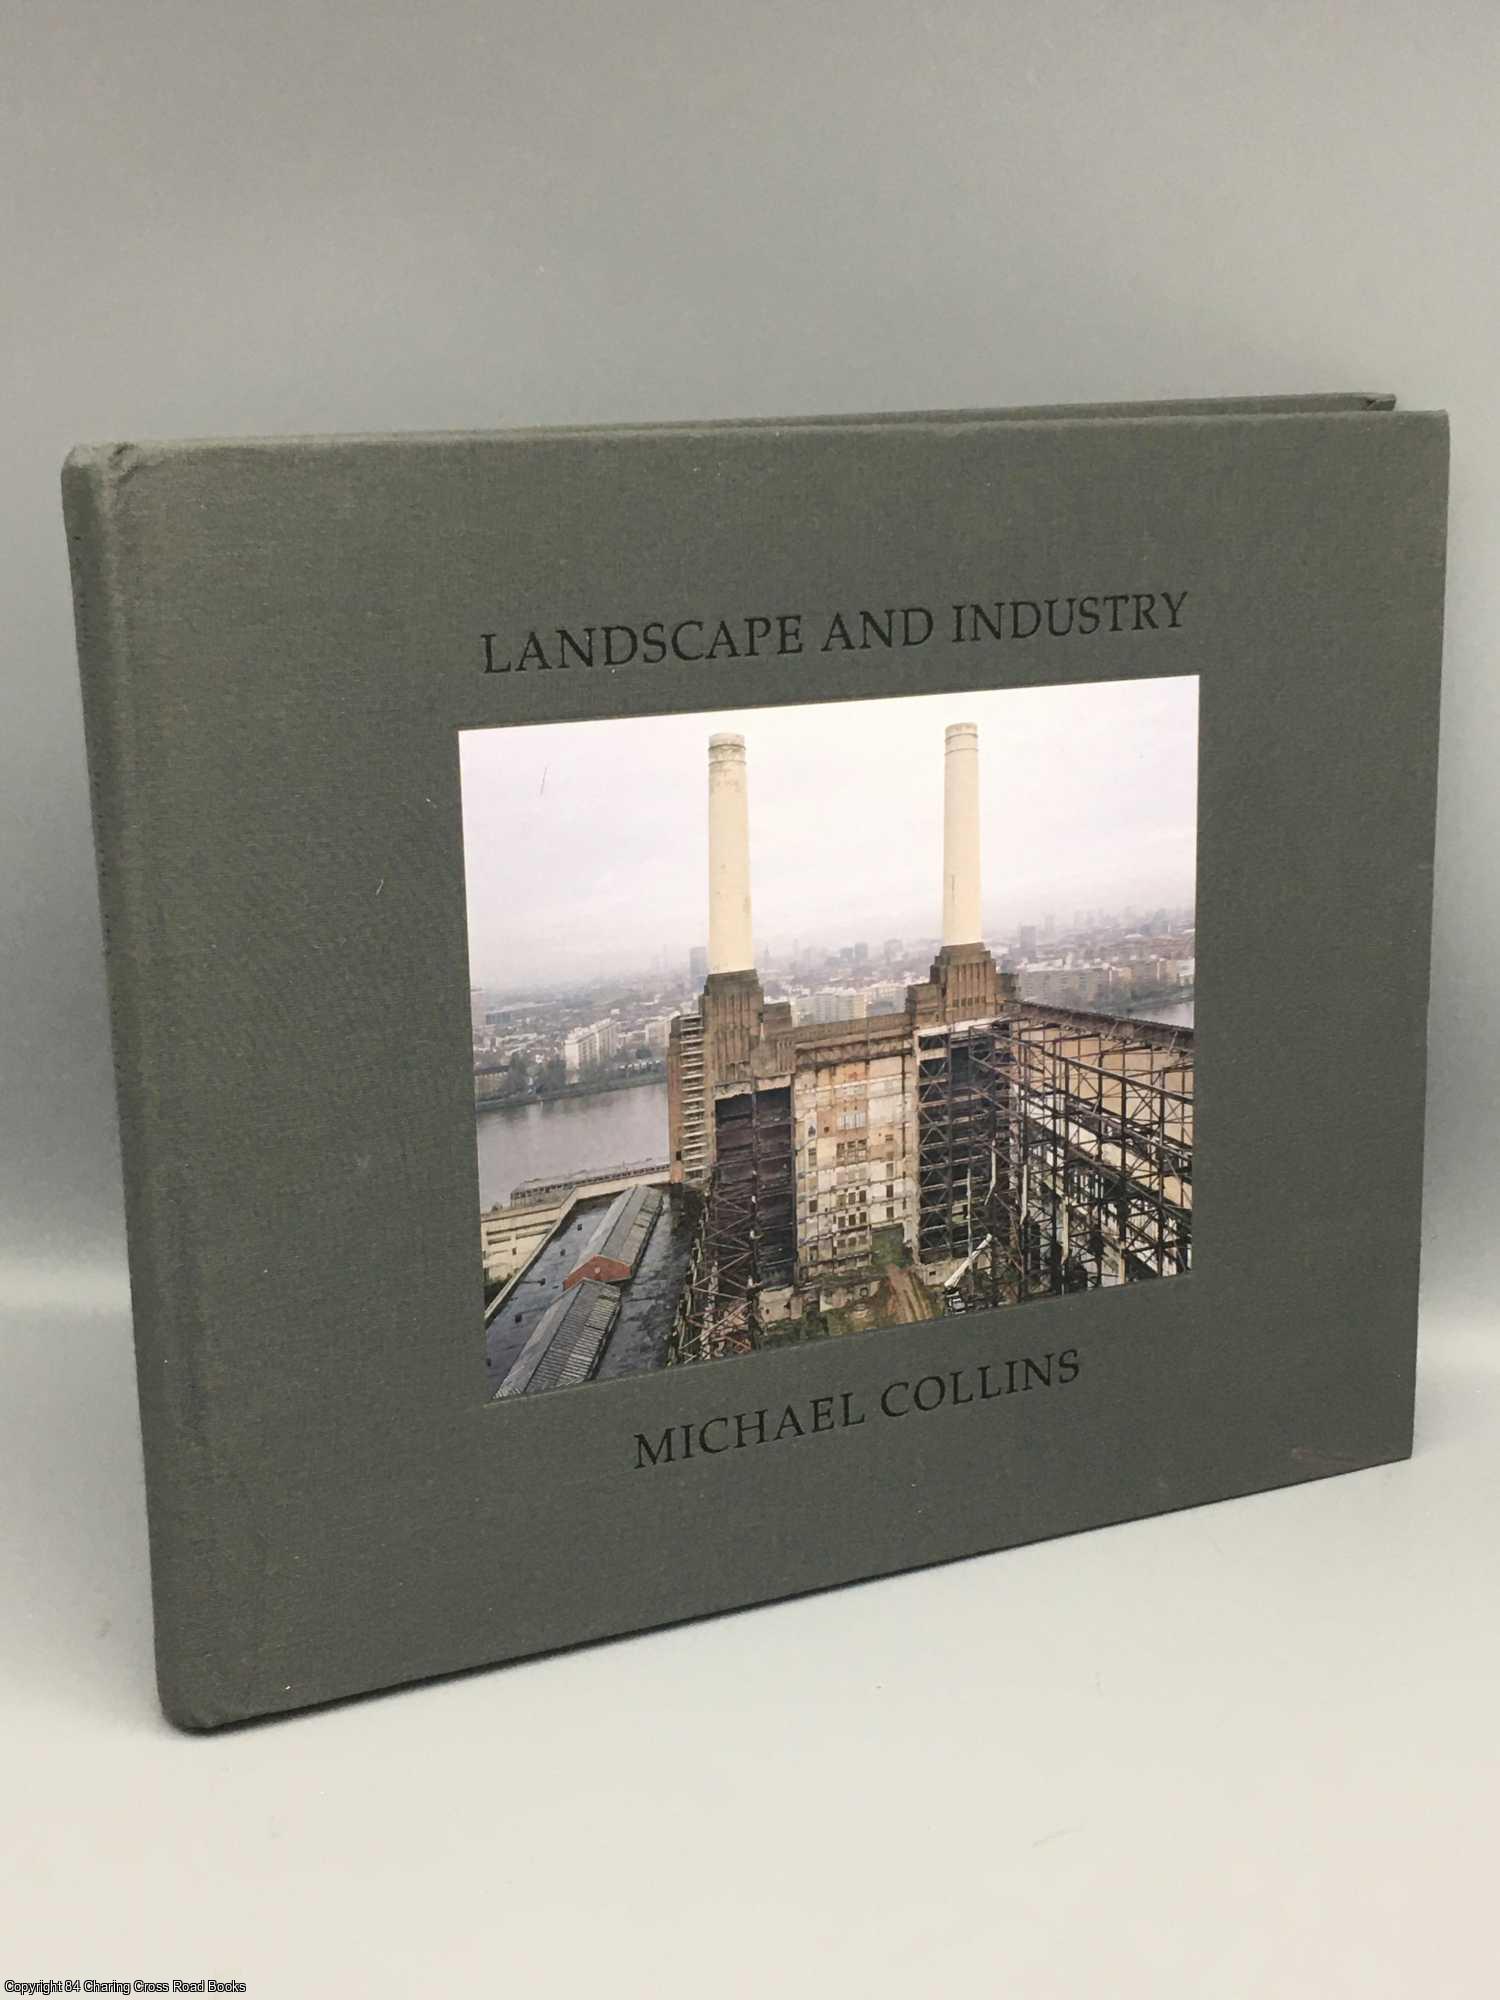 Collins, Michael - Landscape and Industry: Michael Collins